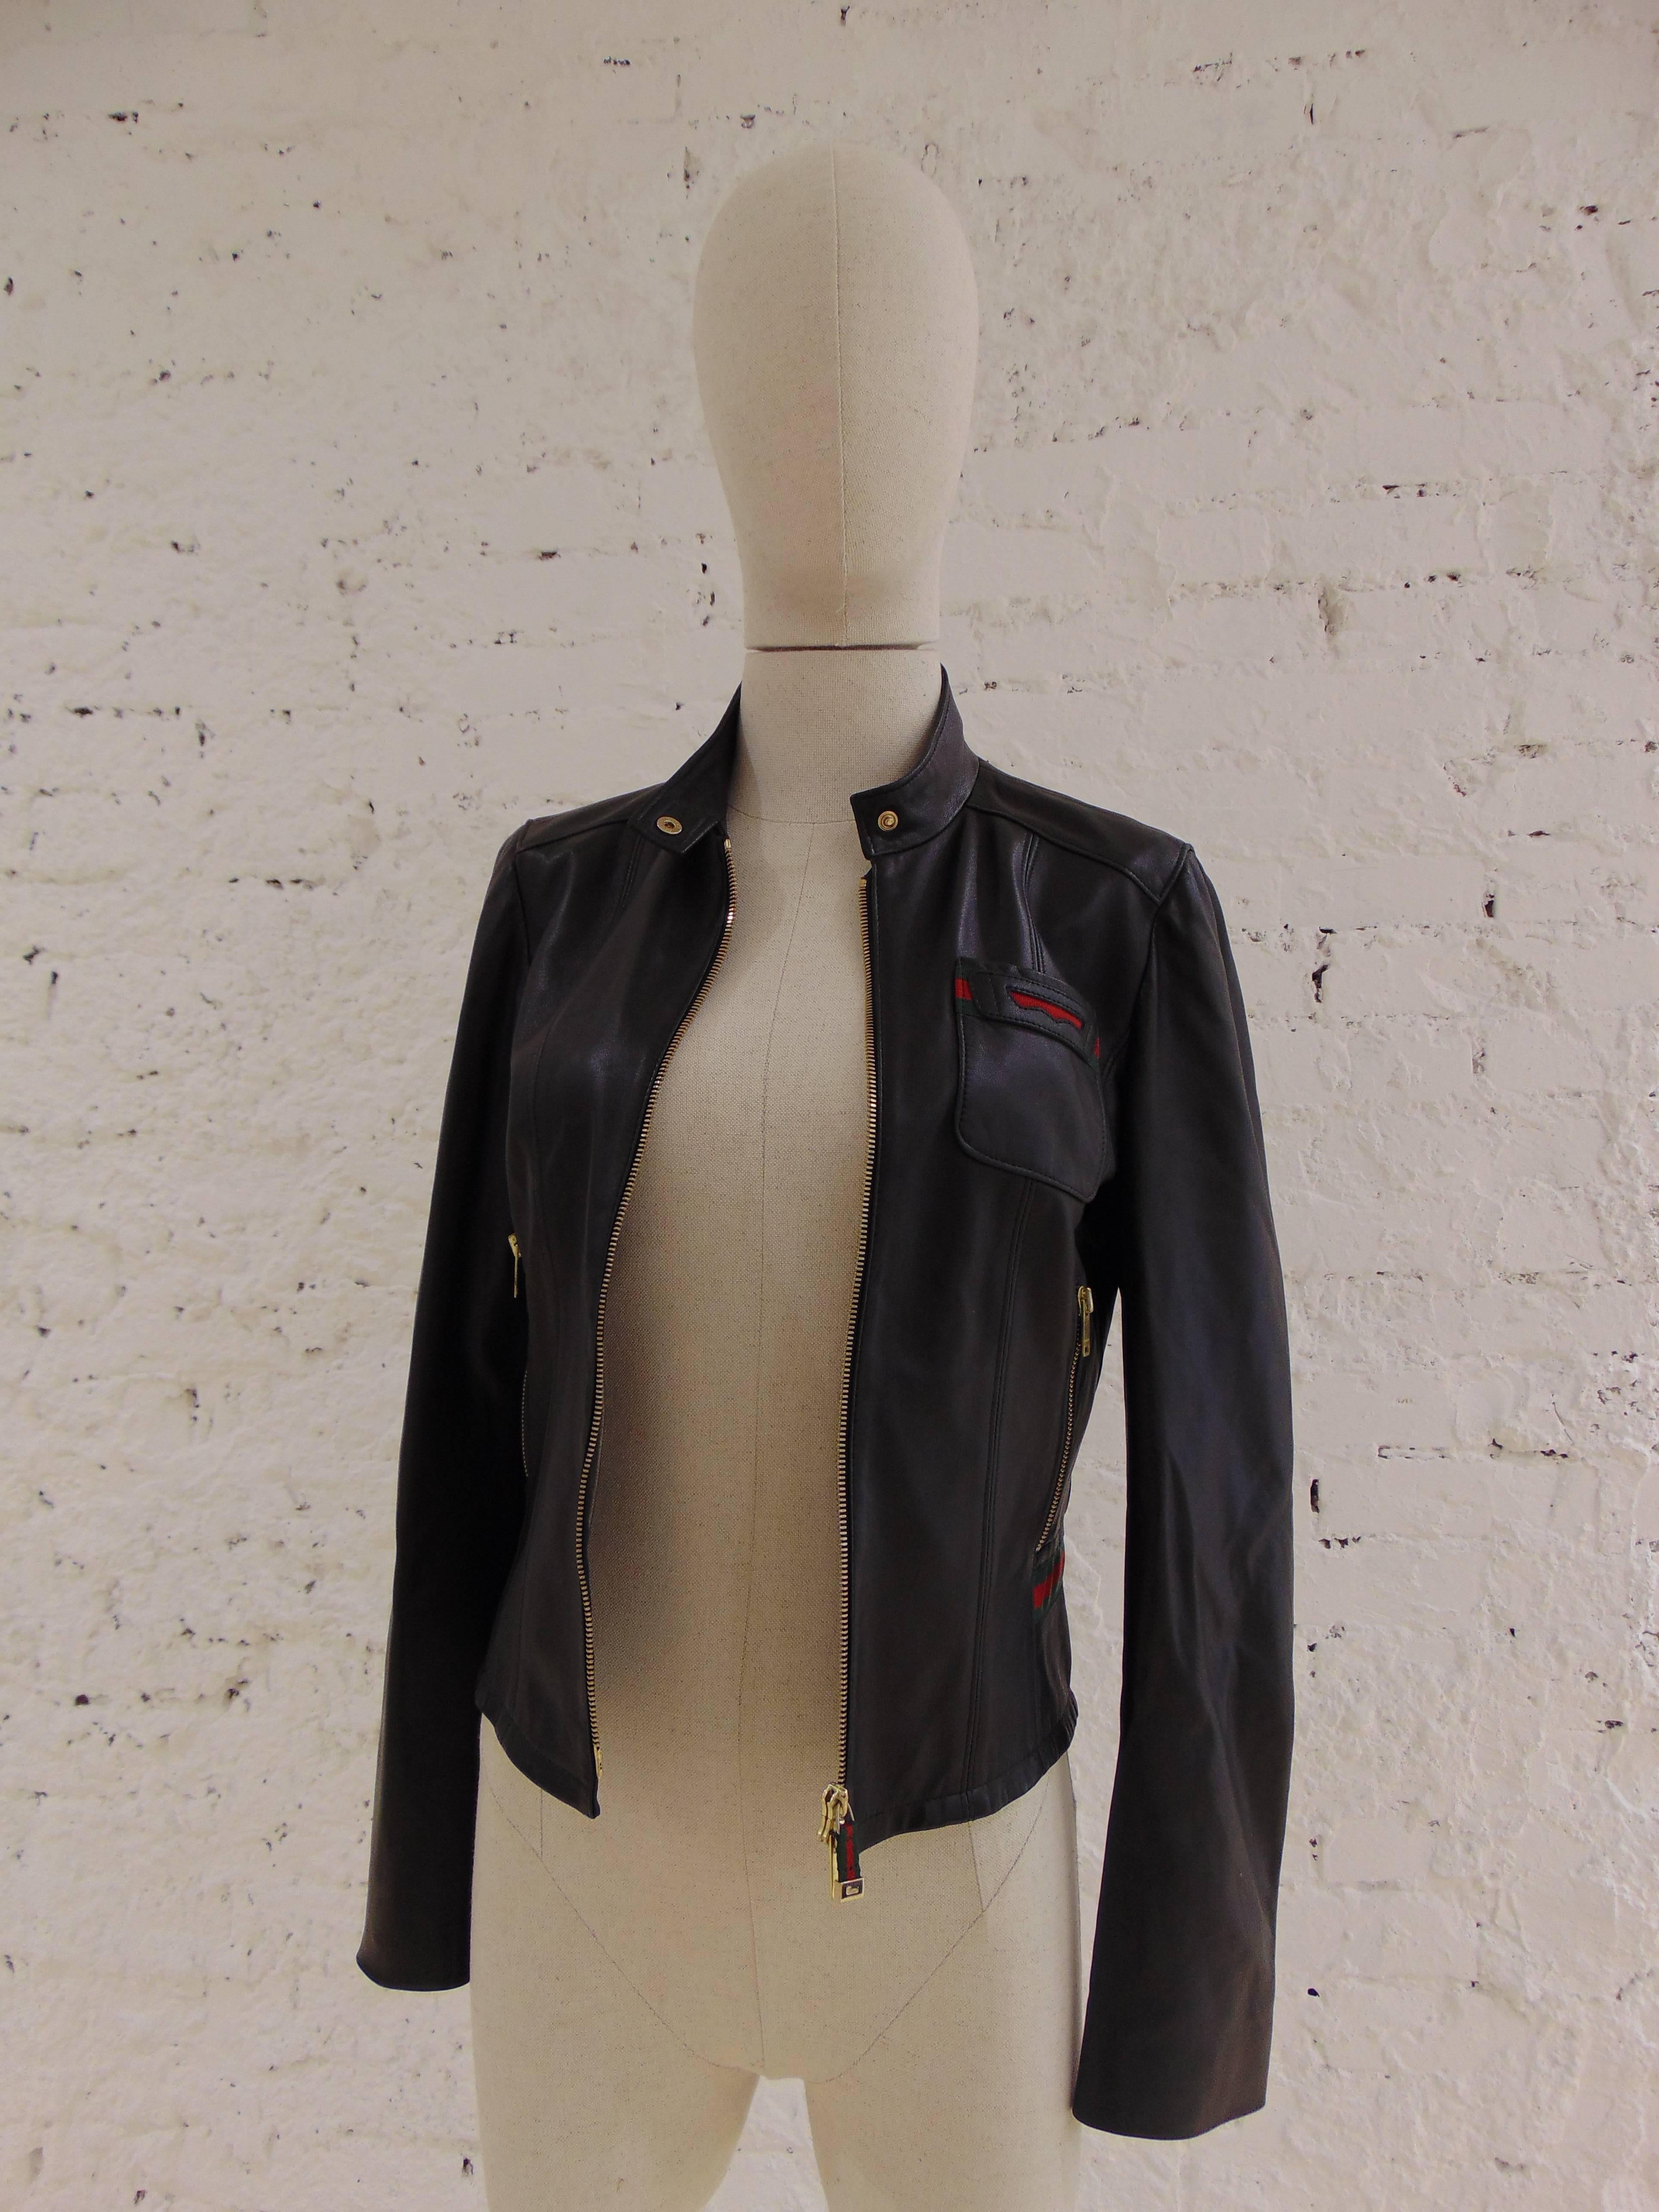 Women's Gucci by Tom Ford black leather jacket